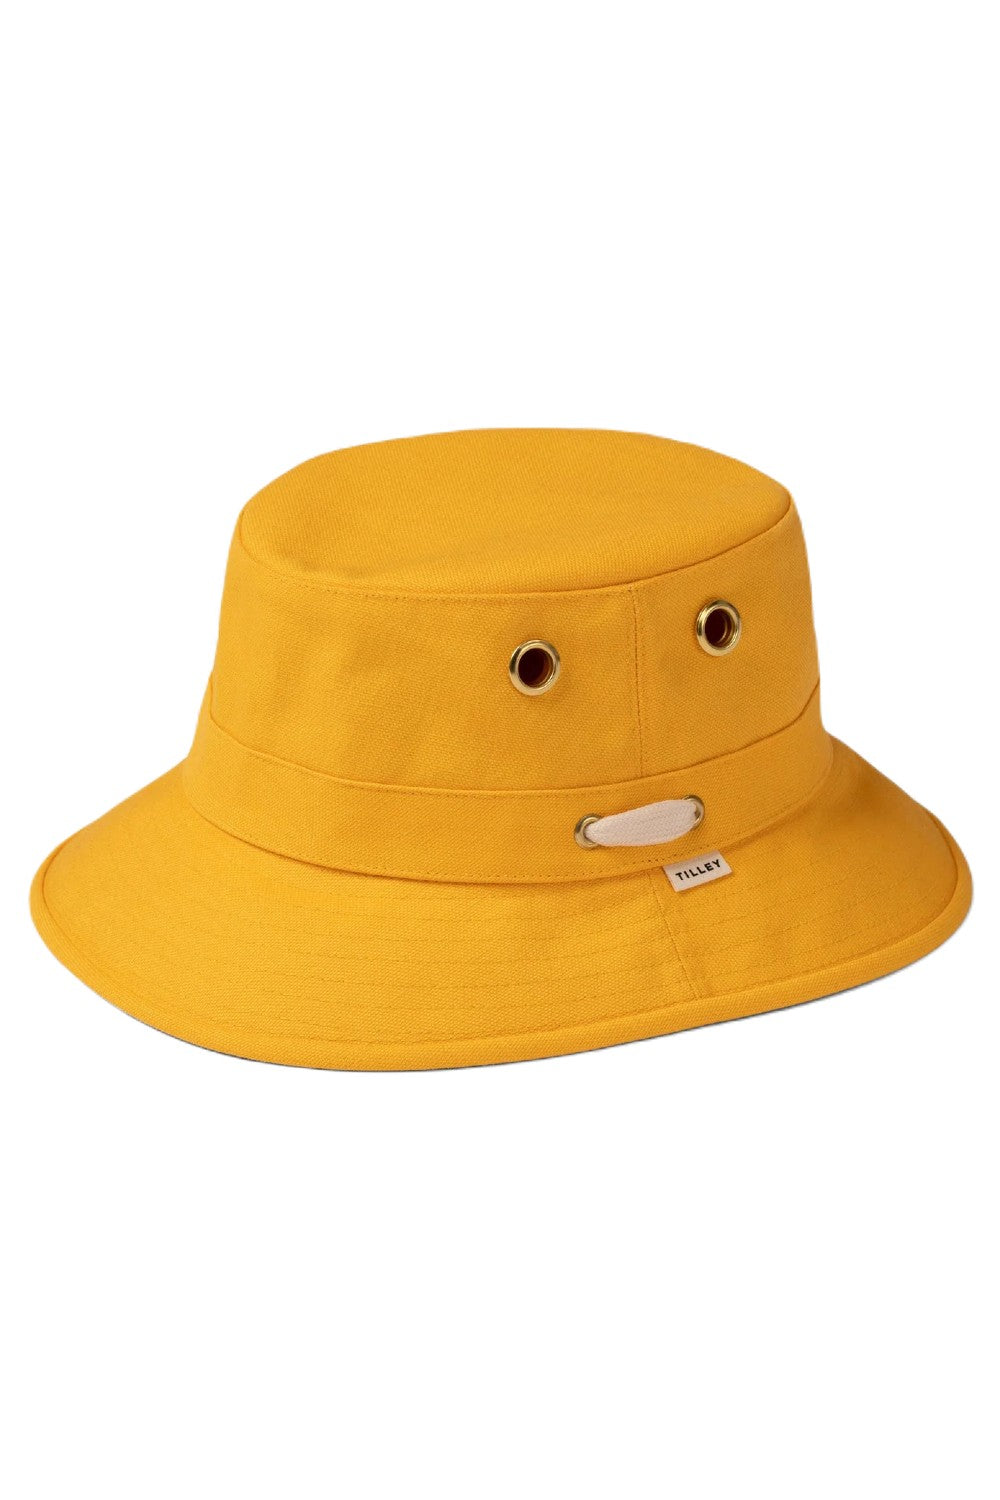 Tilley Hats Iconic Bucket Hat In Yellow 